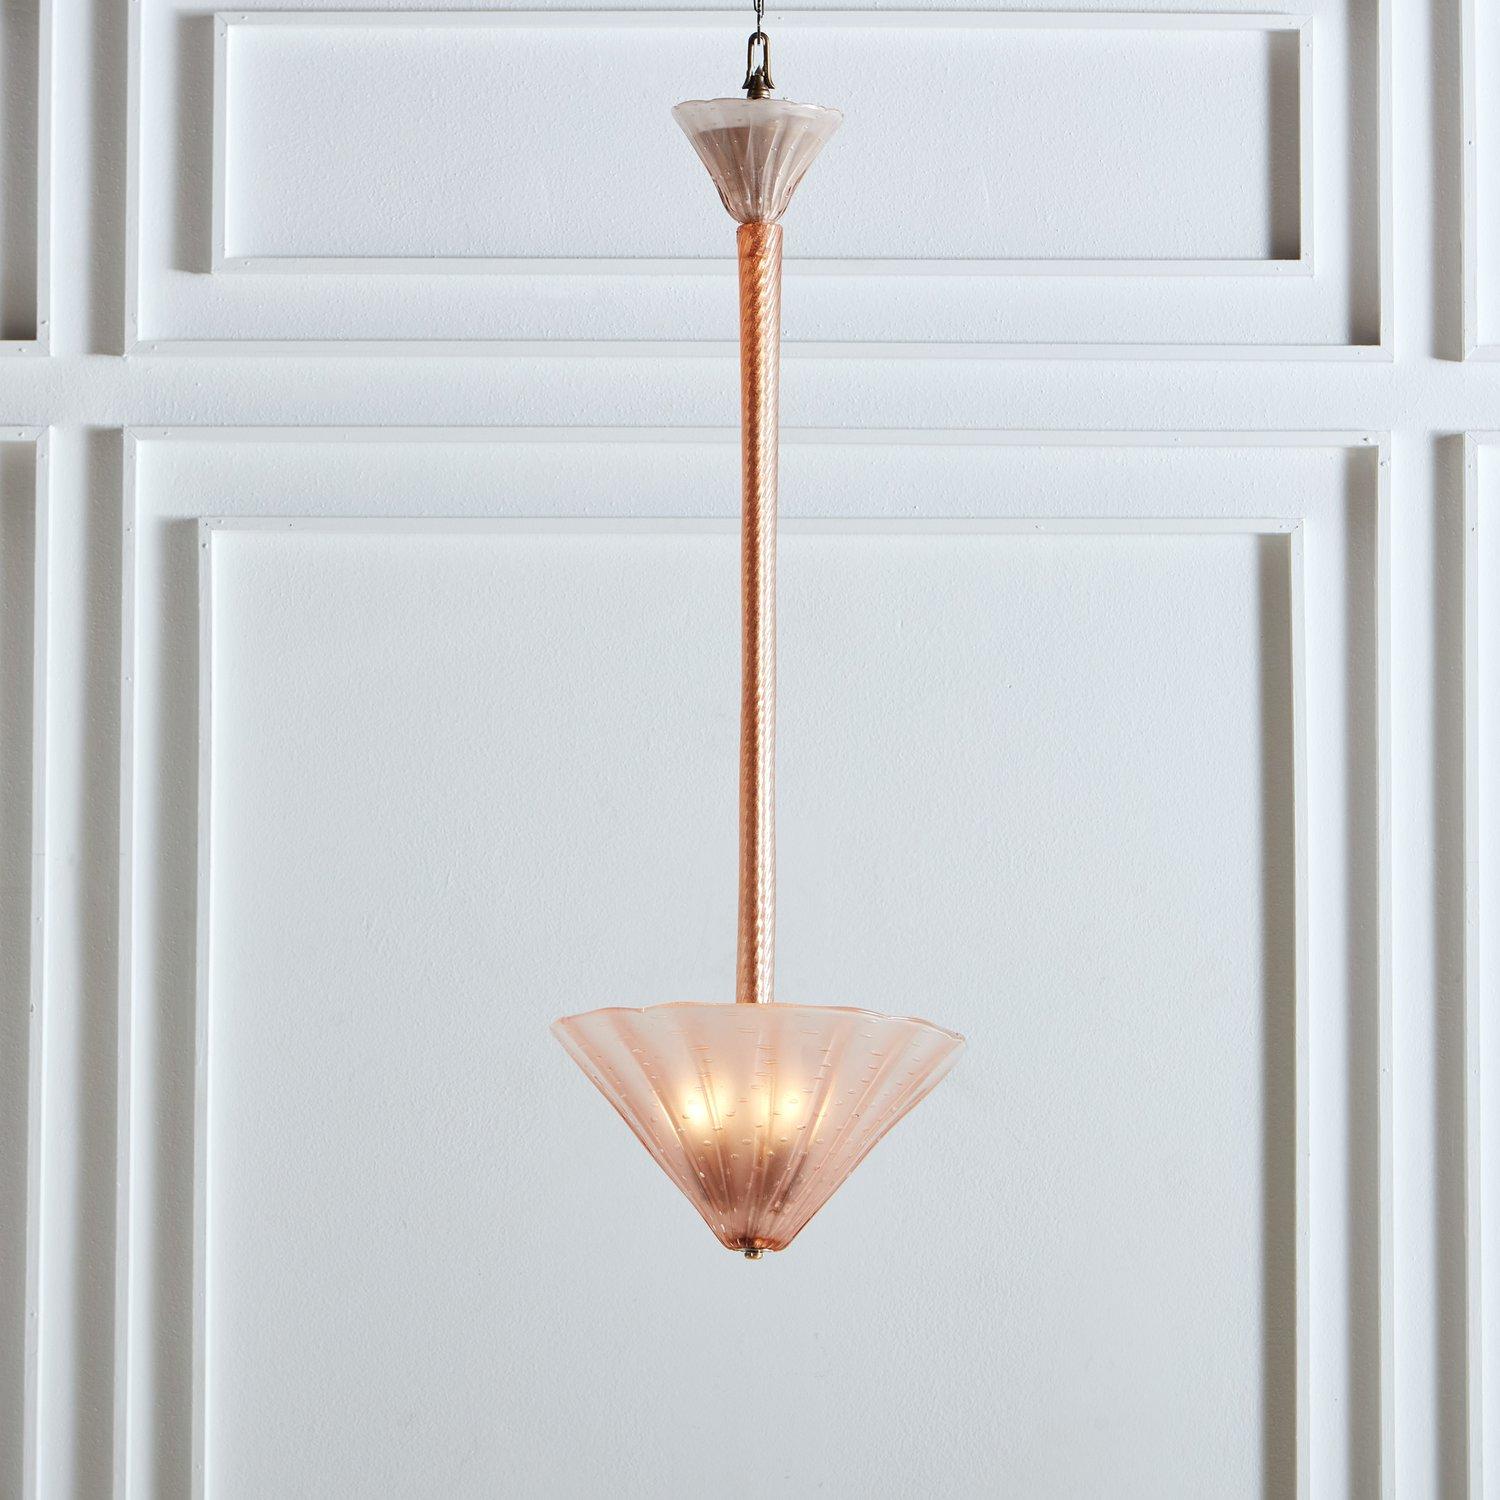 A gorgeous 1970s hand blown Murano glass pendant light. This elegant pendant has a pink fluted glass torchiere shade with subtle bubble details and a bottom chrome and brass finial. It hangs from a textured coral glass tube and has a pink glass